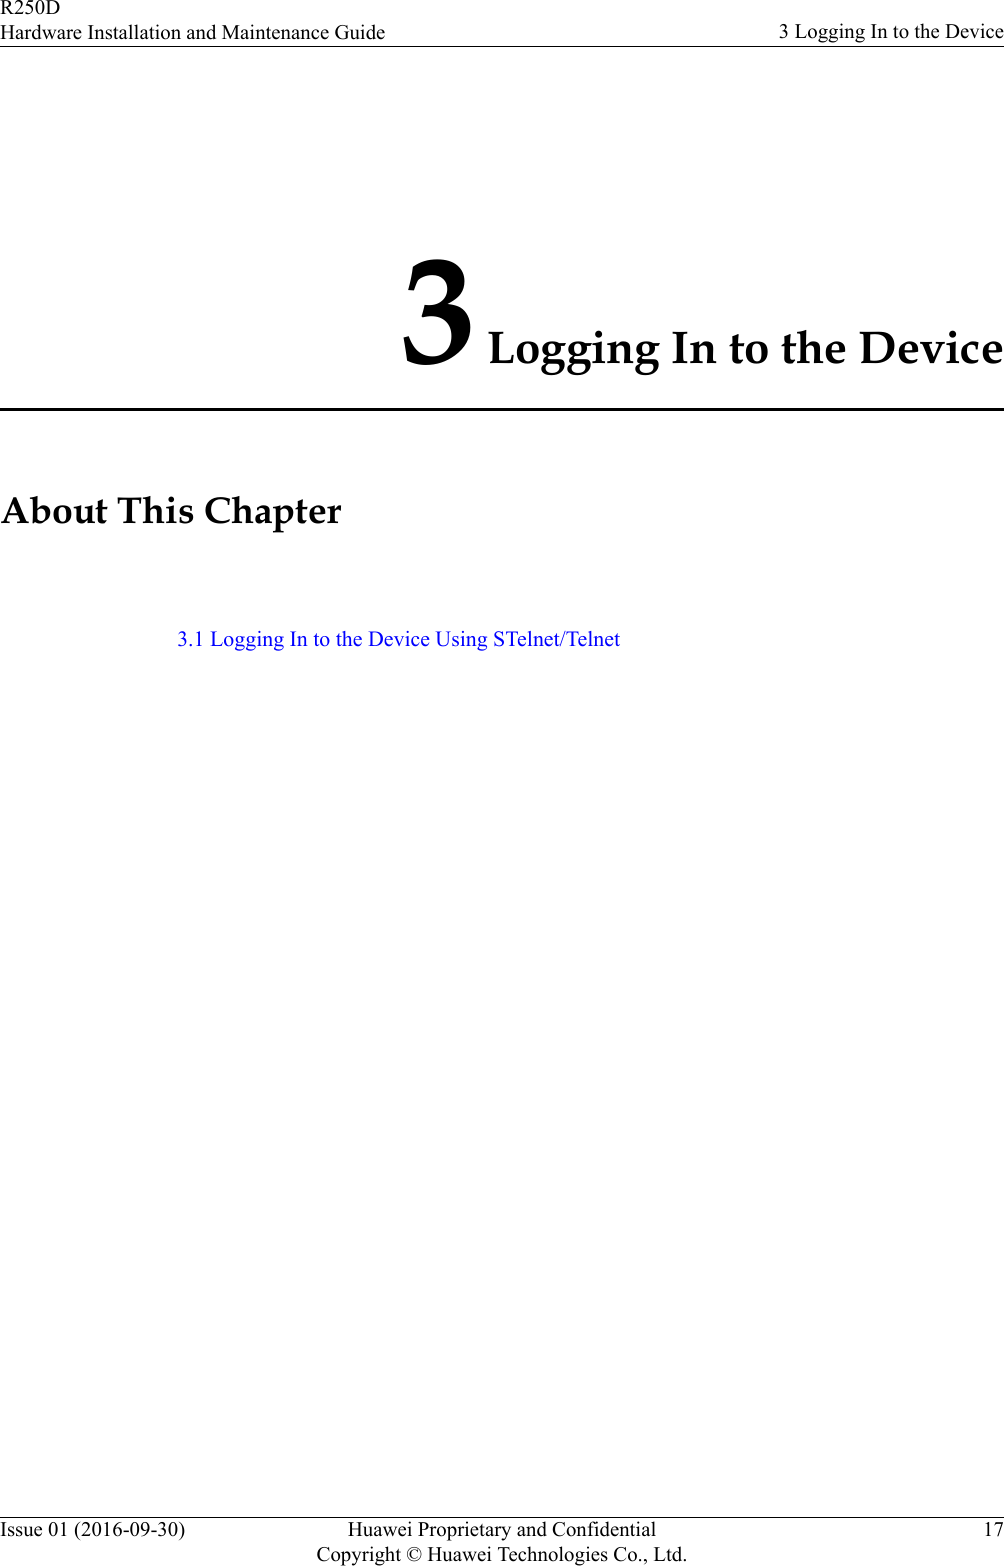 3 Logging In to the DeviceAbout This Chapter3.1 Logging In to the Device Using STelnet/TelnetR250DHardware Installation and Maintenance Guide 3 Logging In to the DeviceIssue 01 (2016-09-30) Huawei Proprietary and ConfidentialCopyright © Huawei Technologies Co., Ltd.17